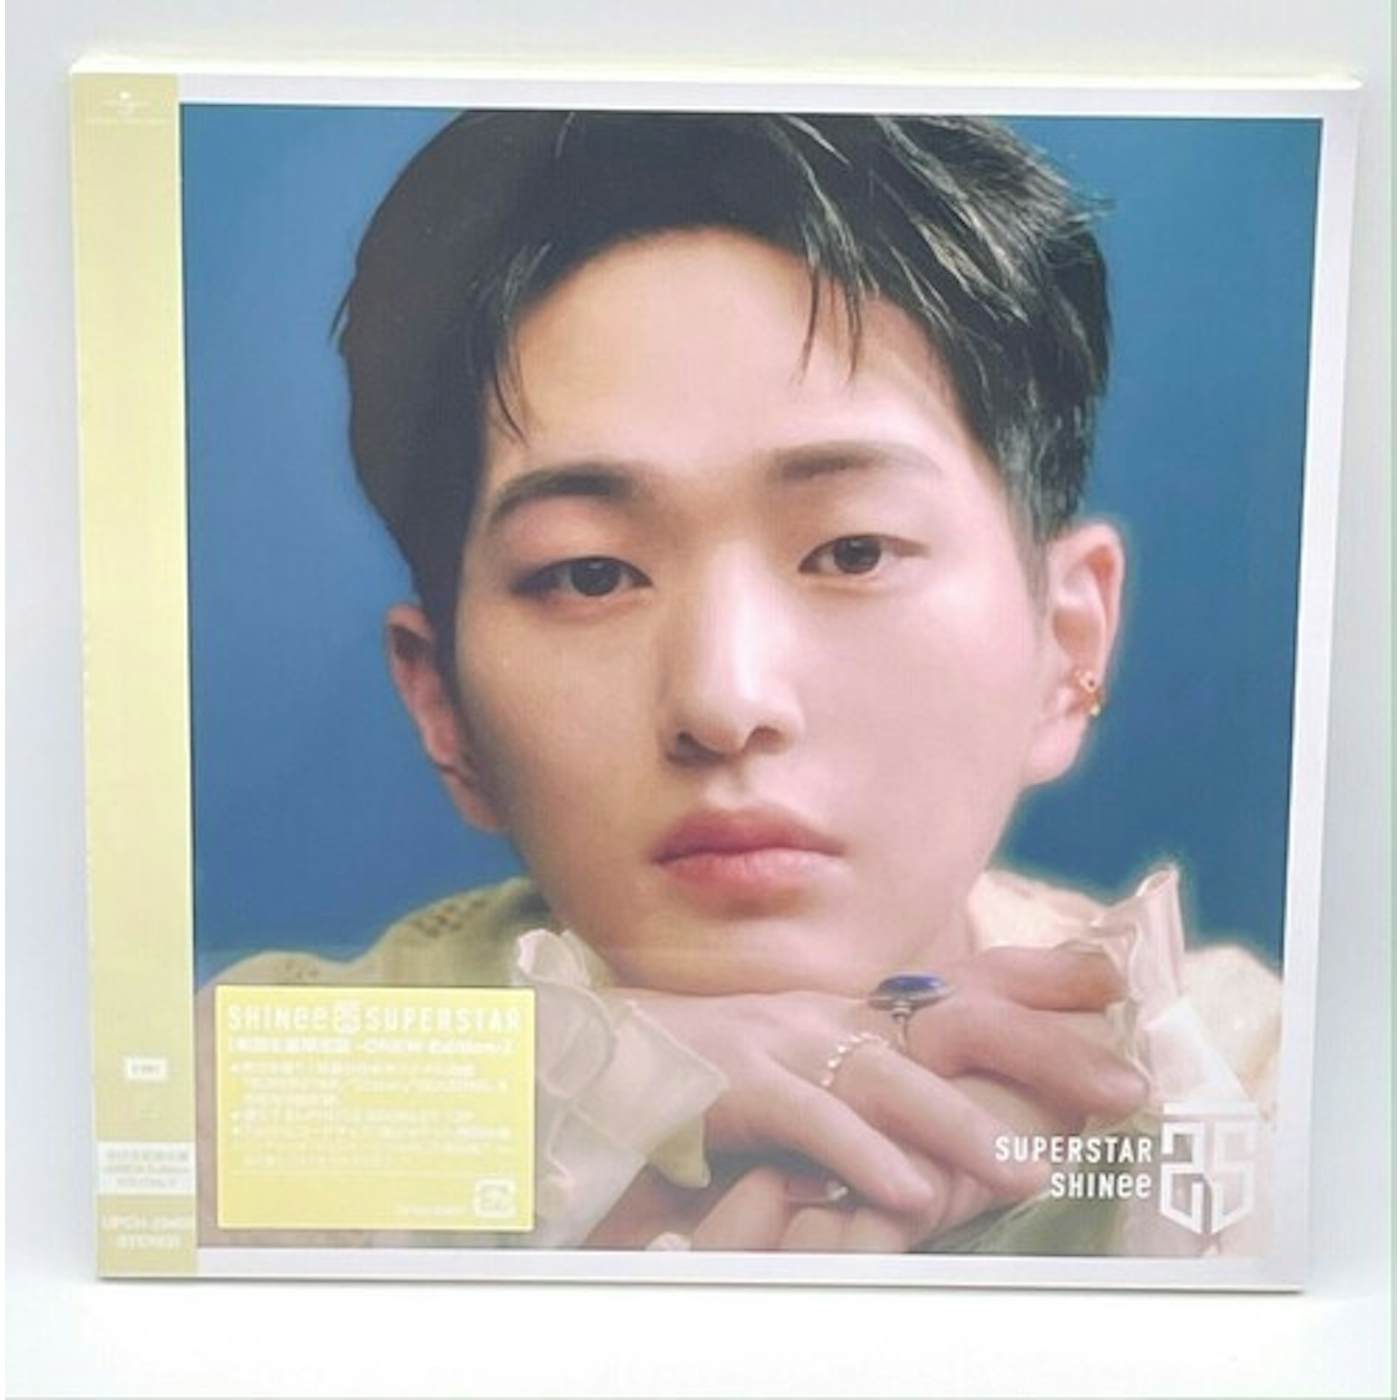 SHINee SUPERSTAR (ONEW EDITION) CD